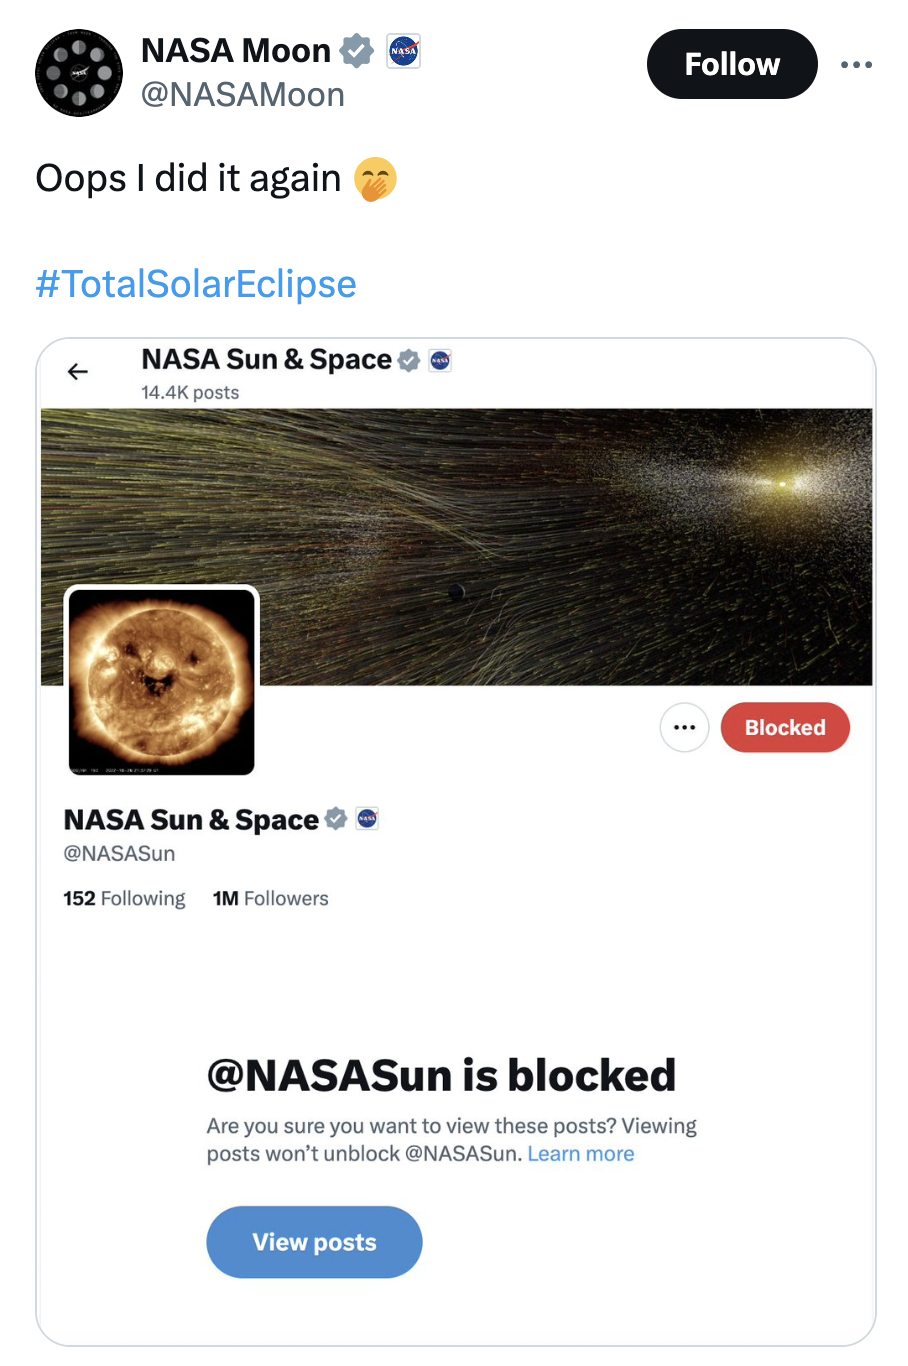 screenshot - Nasa Moon Oops I did it again Nasa Sun & Space posts Nasa Sun & Space 152 ing 1M ers is blocked Are you sure you want to view these posts? Viewing posts won't unblock . Learn more View posts Blocked